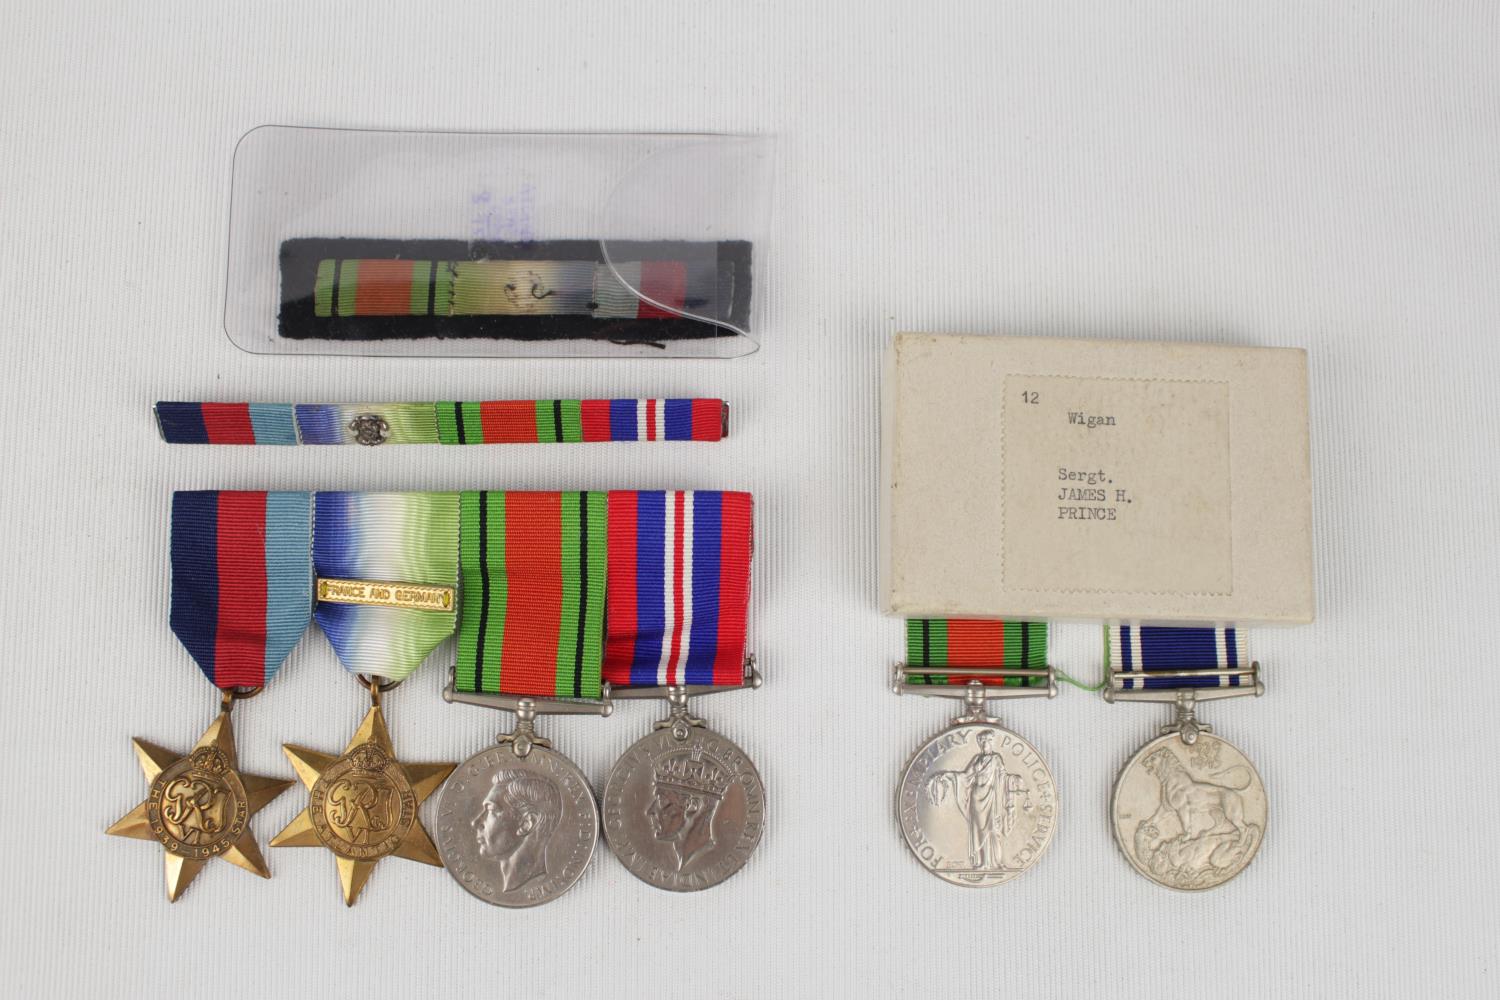 WW2 Medal 4 Medal group with Ribbons and 2 Medals for Sergt. James H Prince Medal of Exemplary